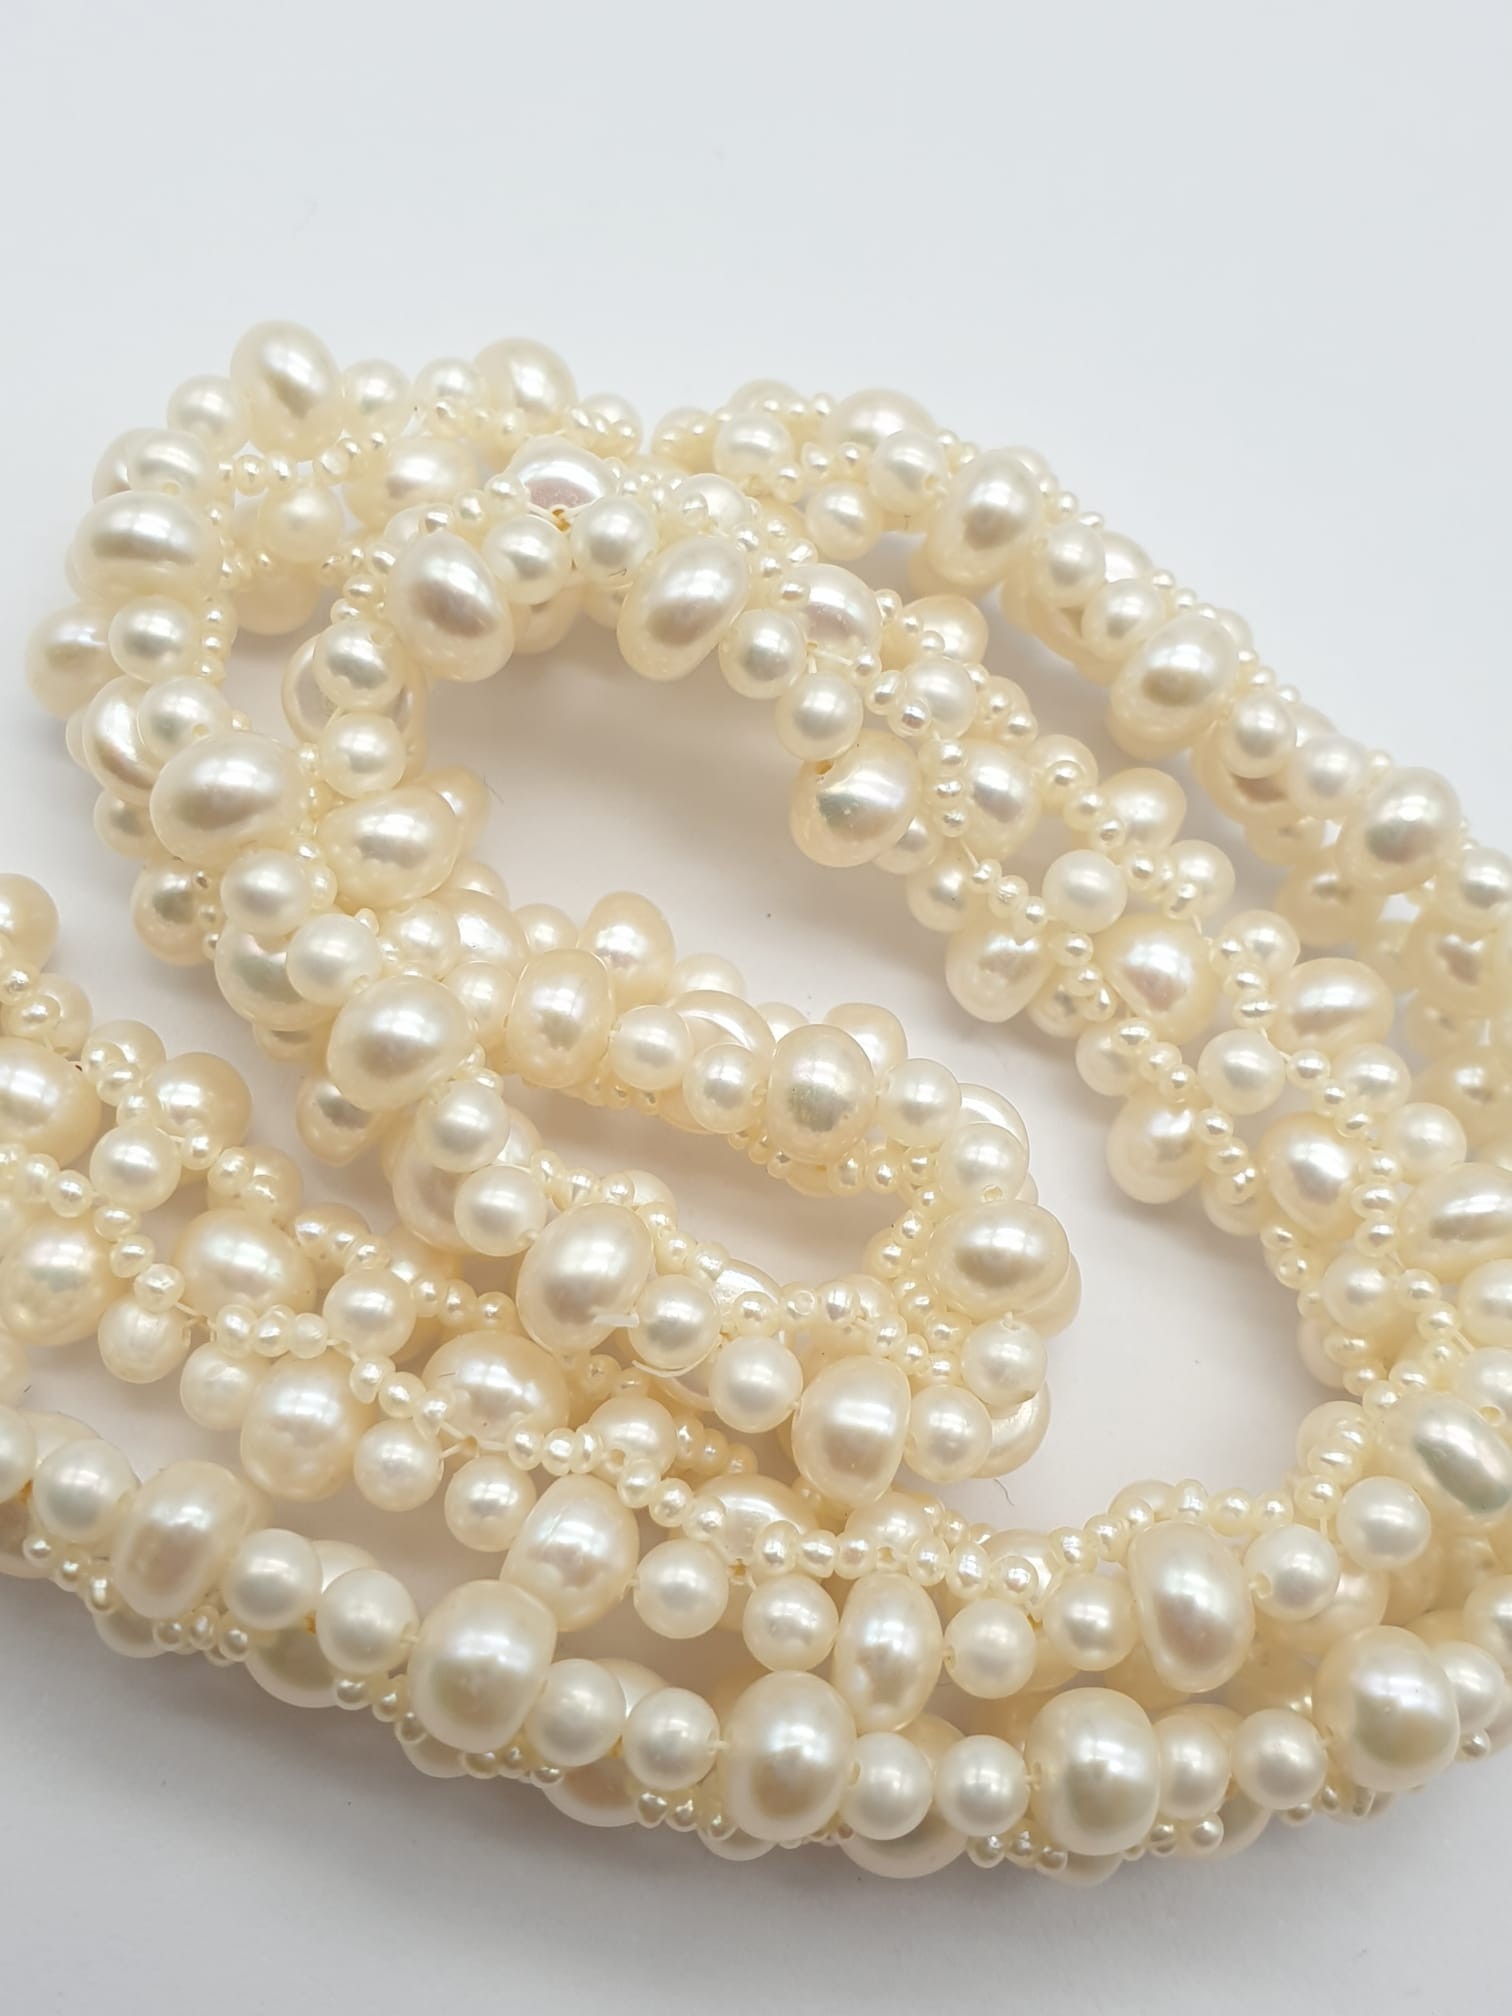 A Silver Necklace with Five Rows of Pearls. 40cm 32.68g - Image 4 of 4